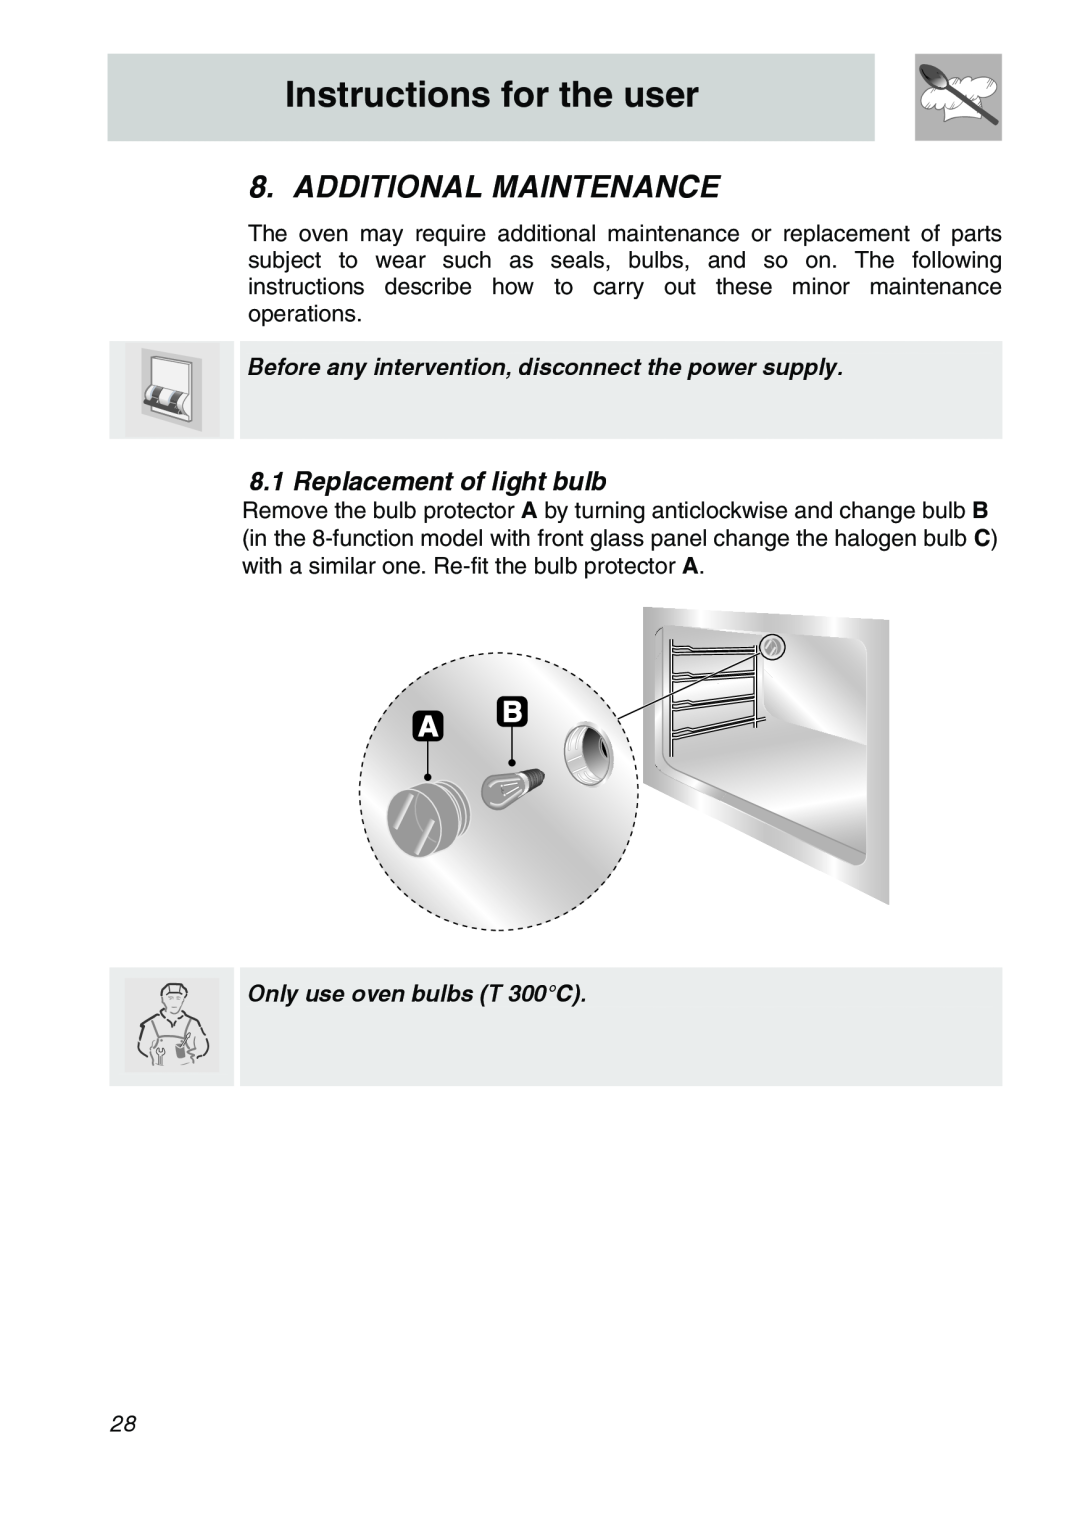 Smeg SA707X-7 Additional Maintenance, Replacement of light bulb, Instructions for the user, Only use oven bulbs T 300C 